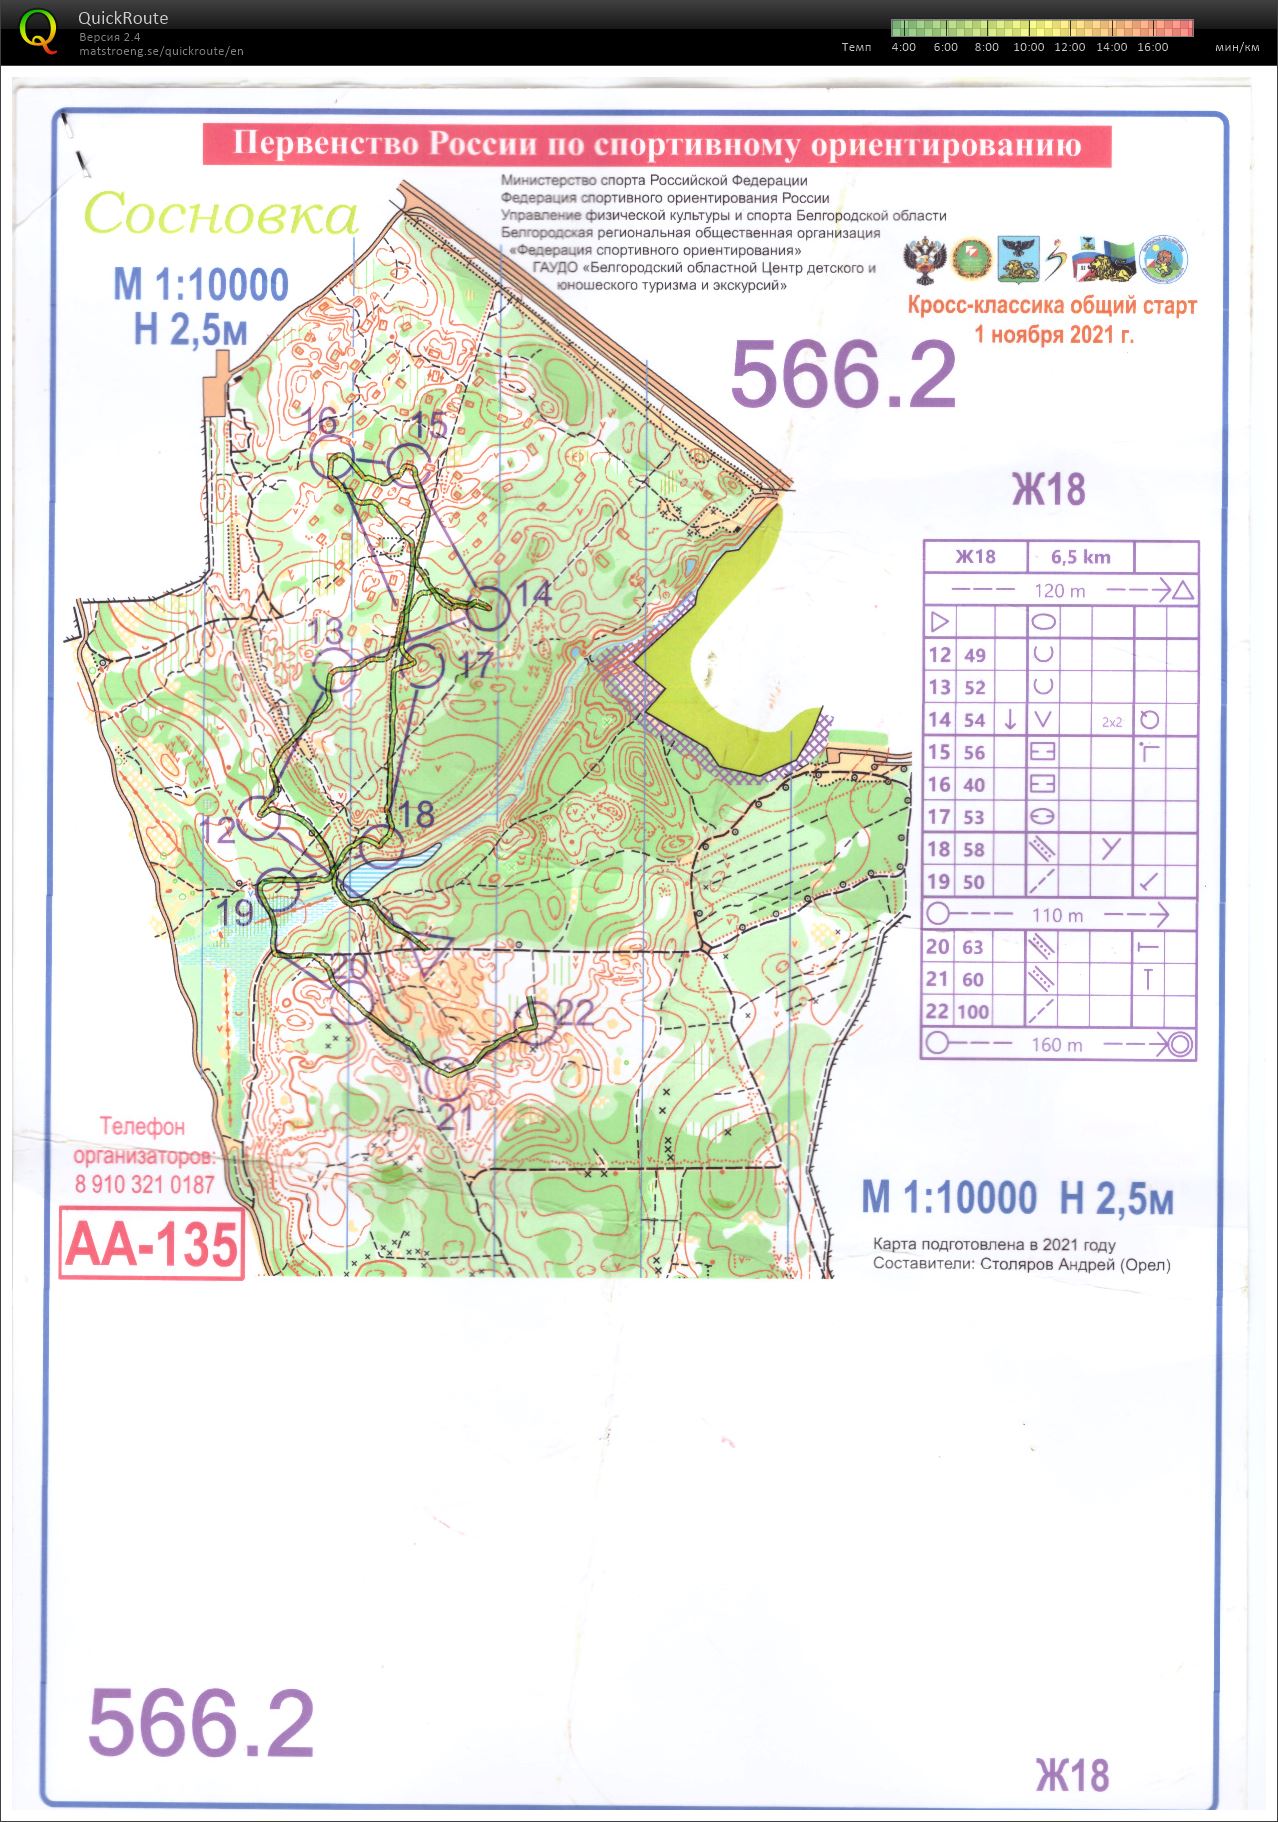 Map with track - Первенство России, area - Белгород. Сосновка, from orienteering map archive of Анна Меркулова